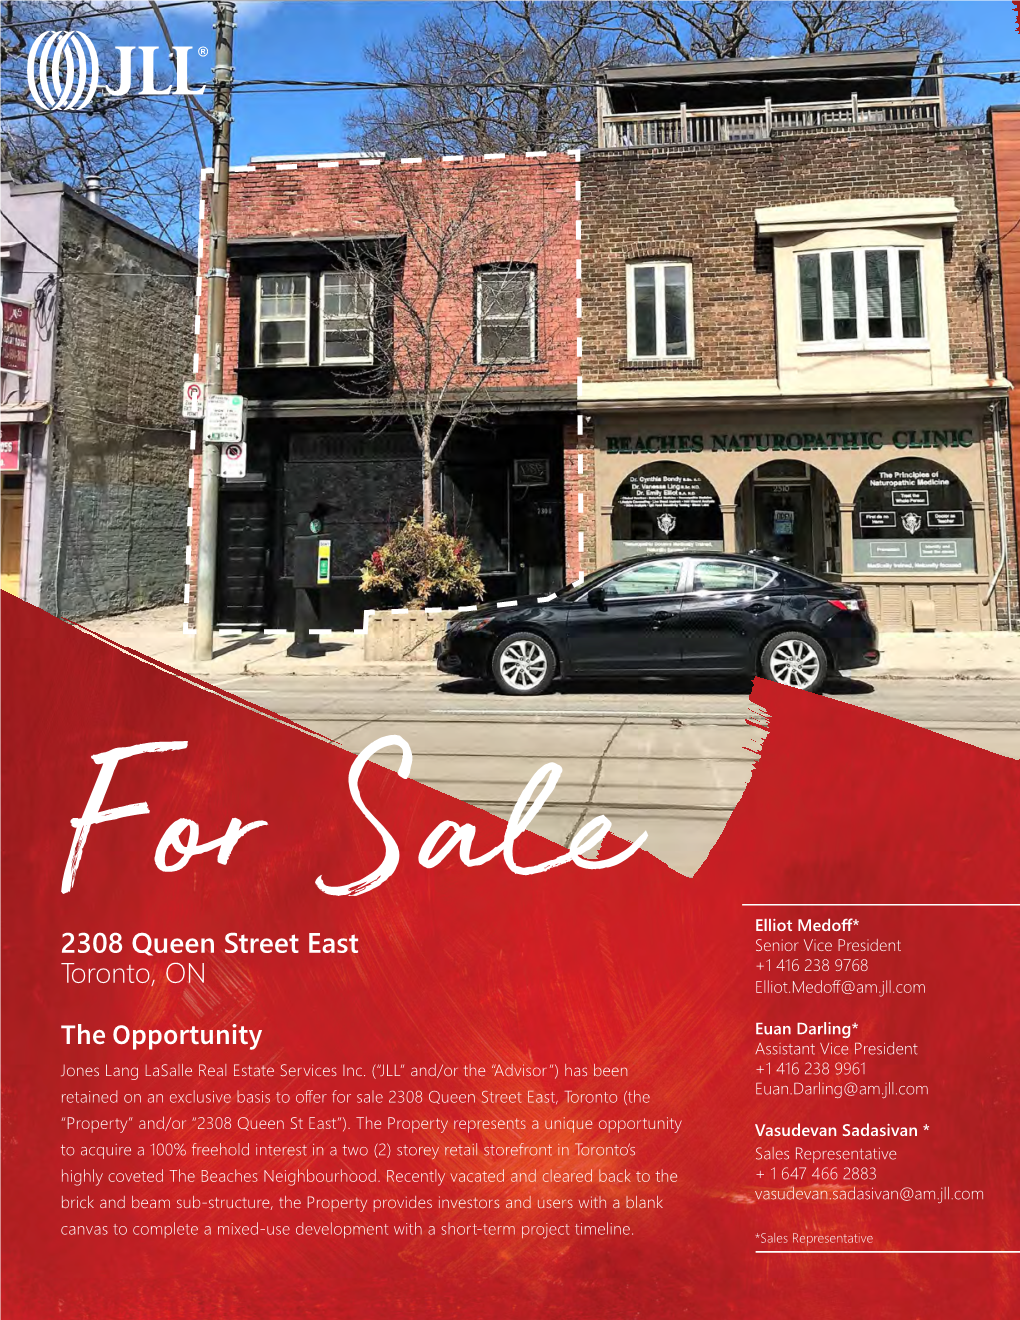 The Opportunity 2308 Queen Street East Toronto, ON